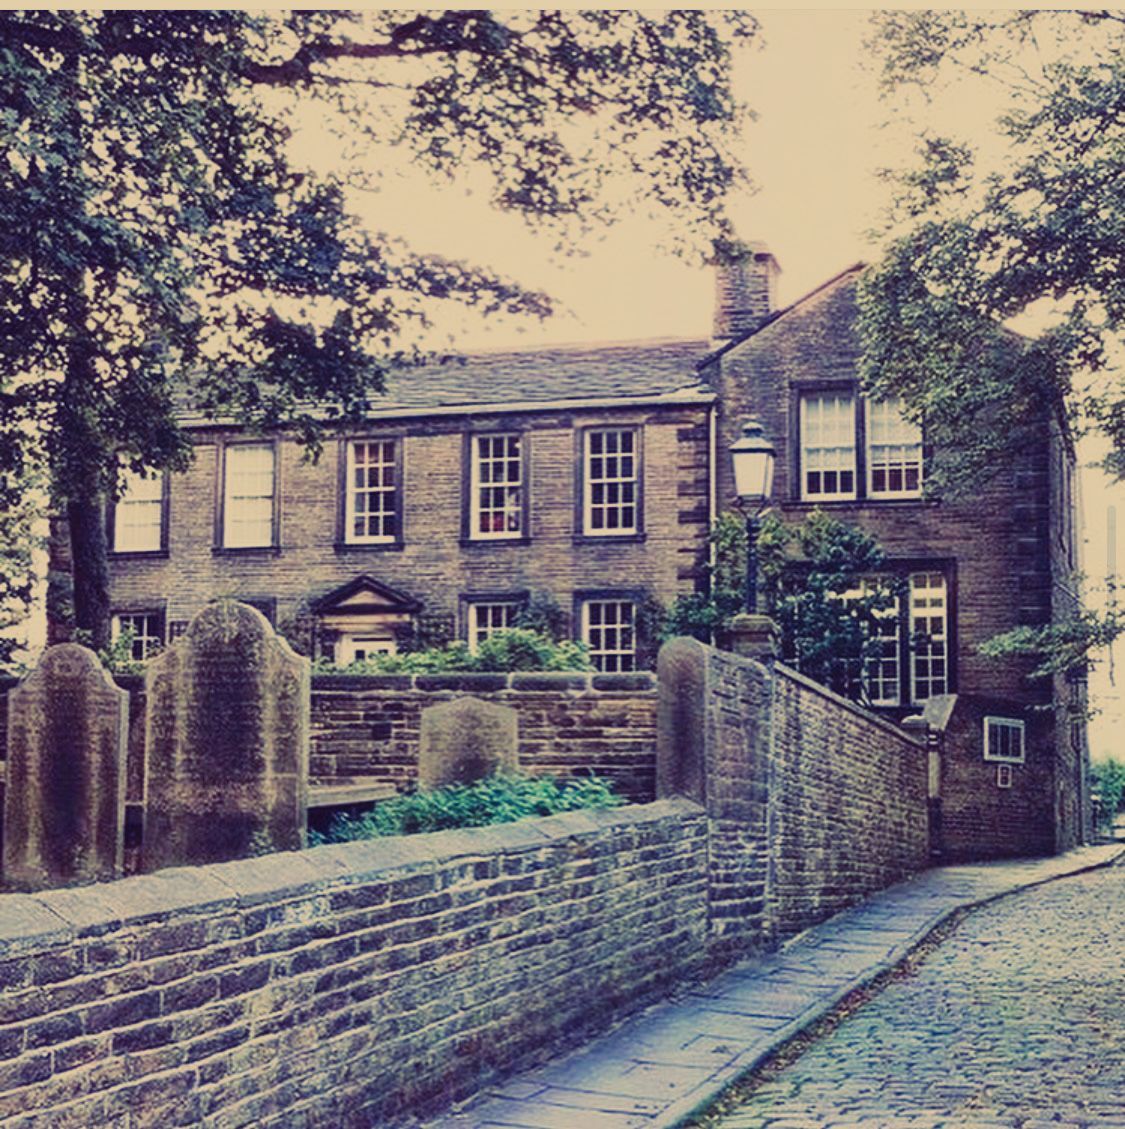 The famous home and village of the Bronte sisters with a profound quote from Charlotte